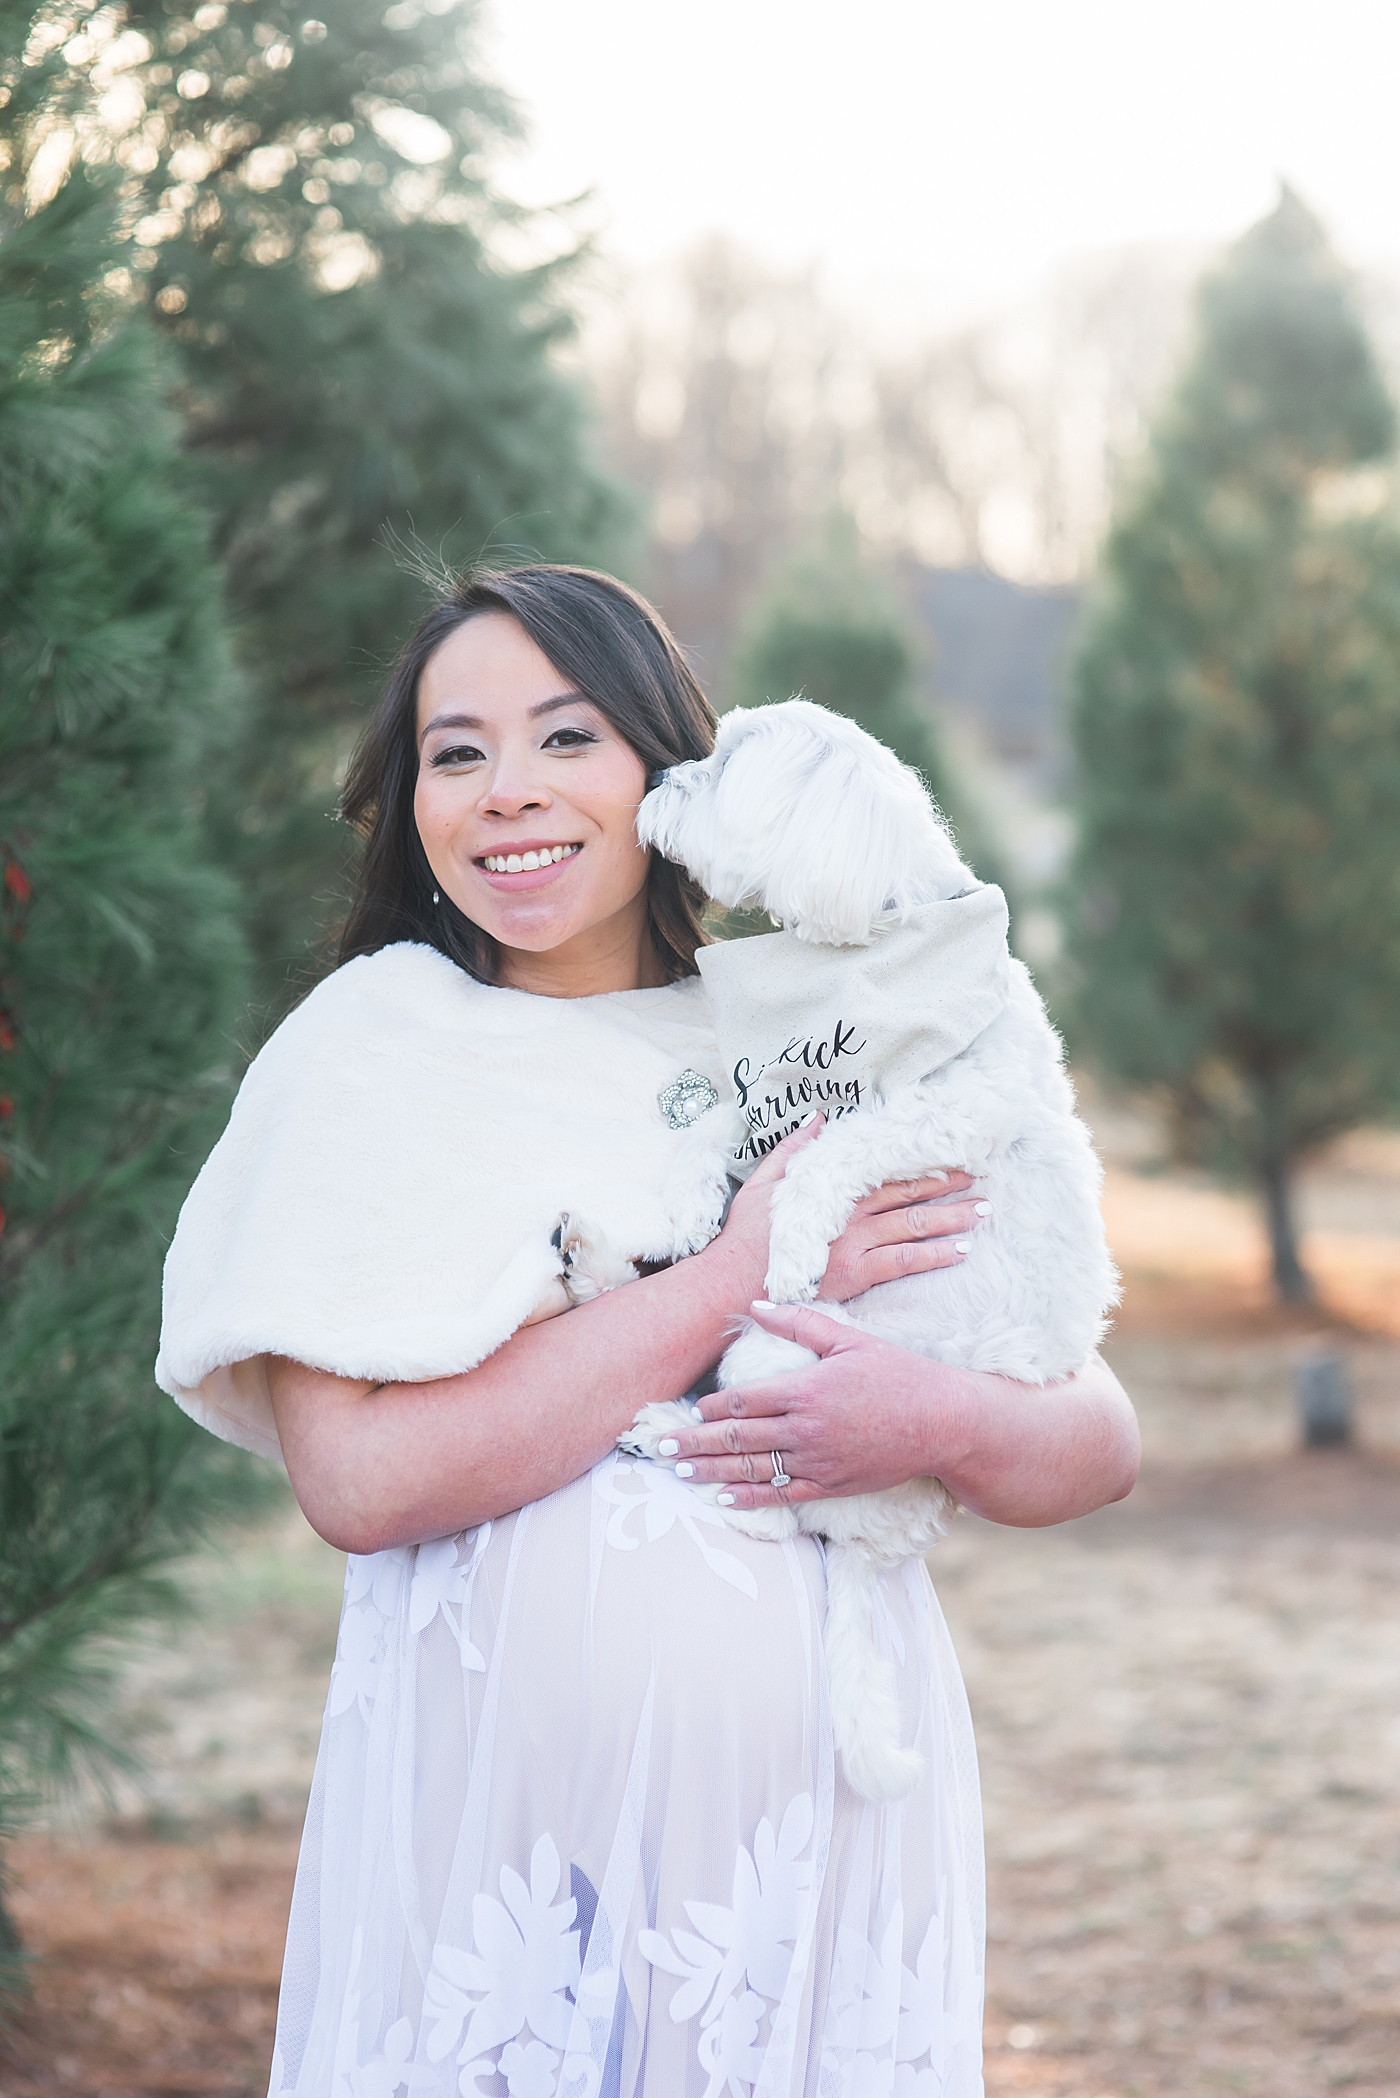 Mom to be holding her white puppy | Photo by Anna Wisjo Photography